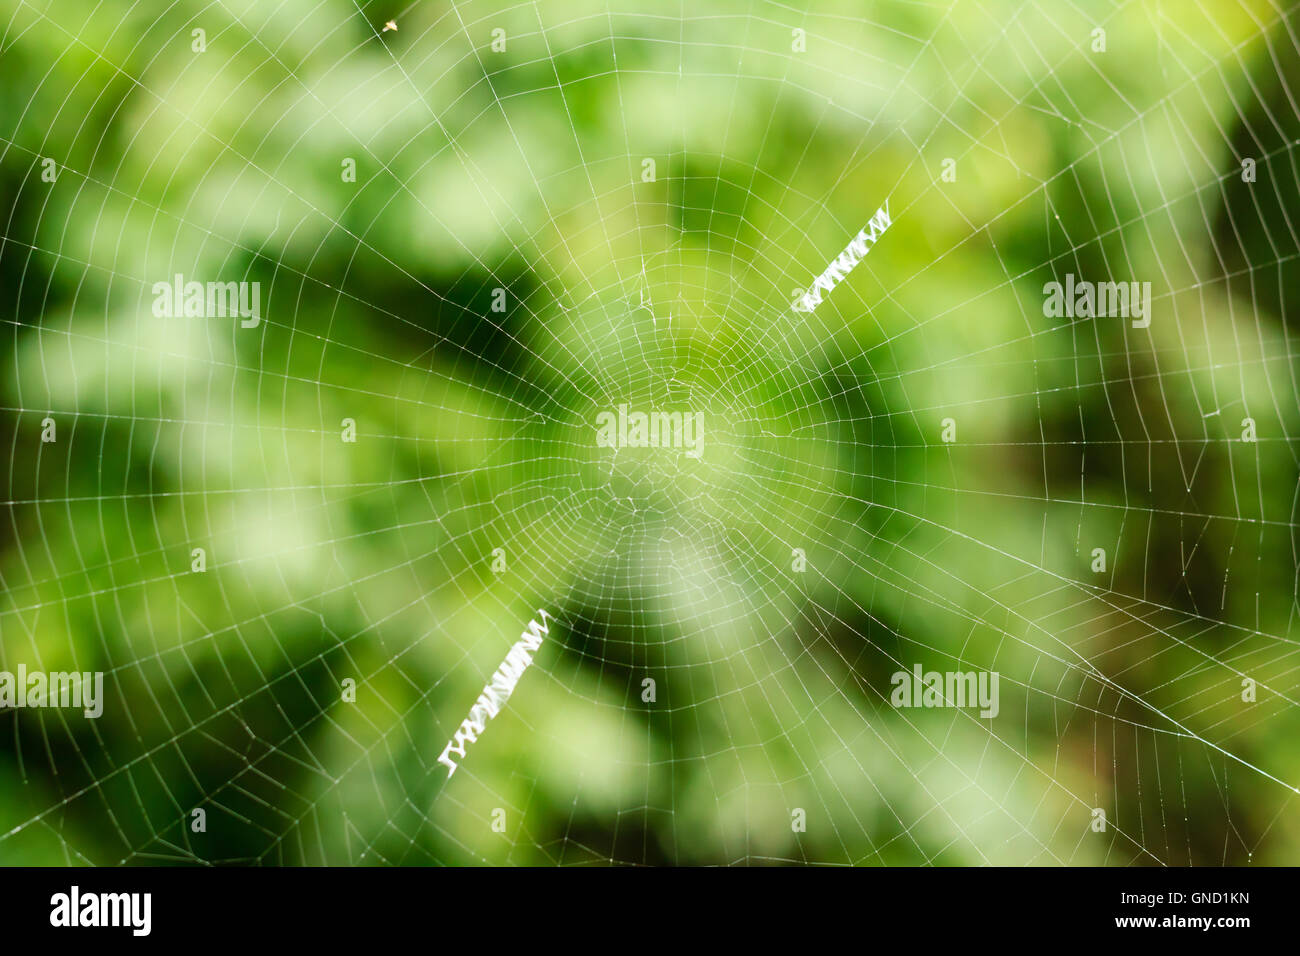 The spider web  closeup in the nature garden Stock Photo